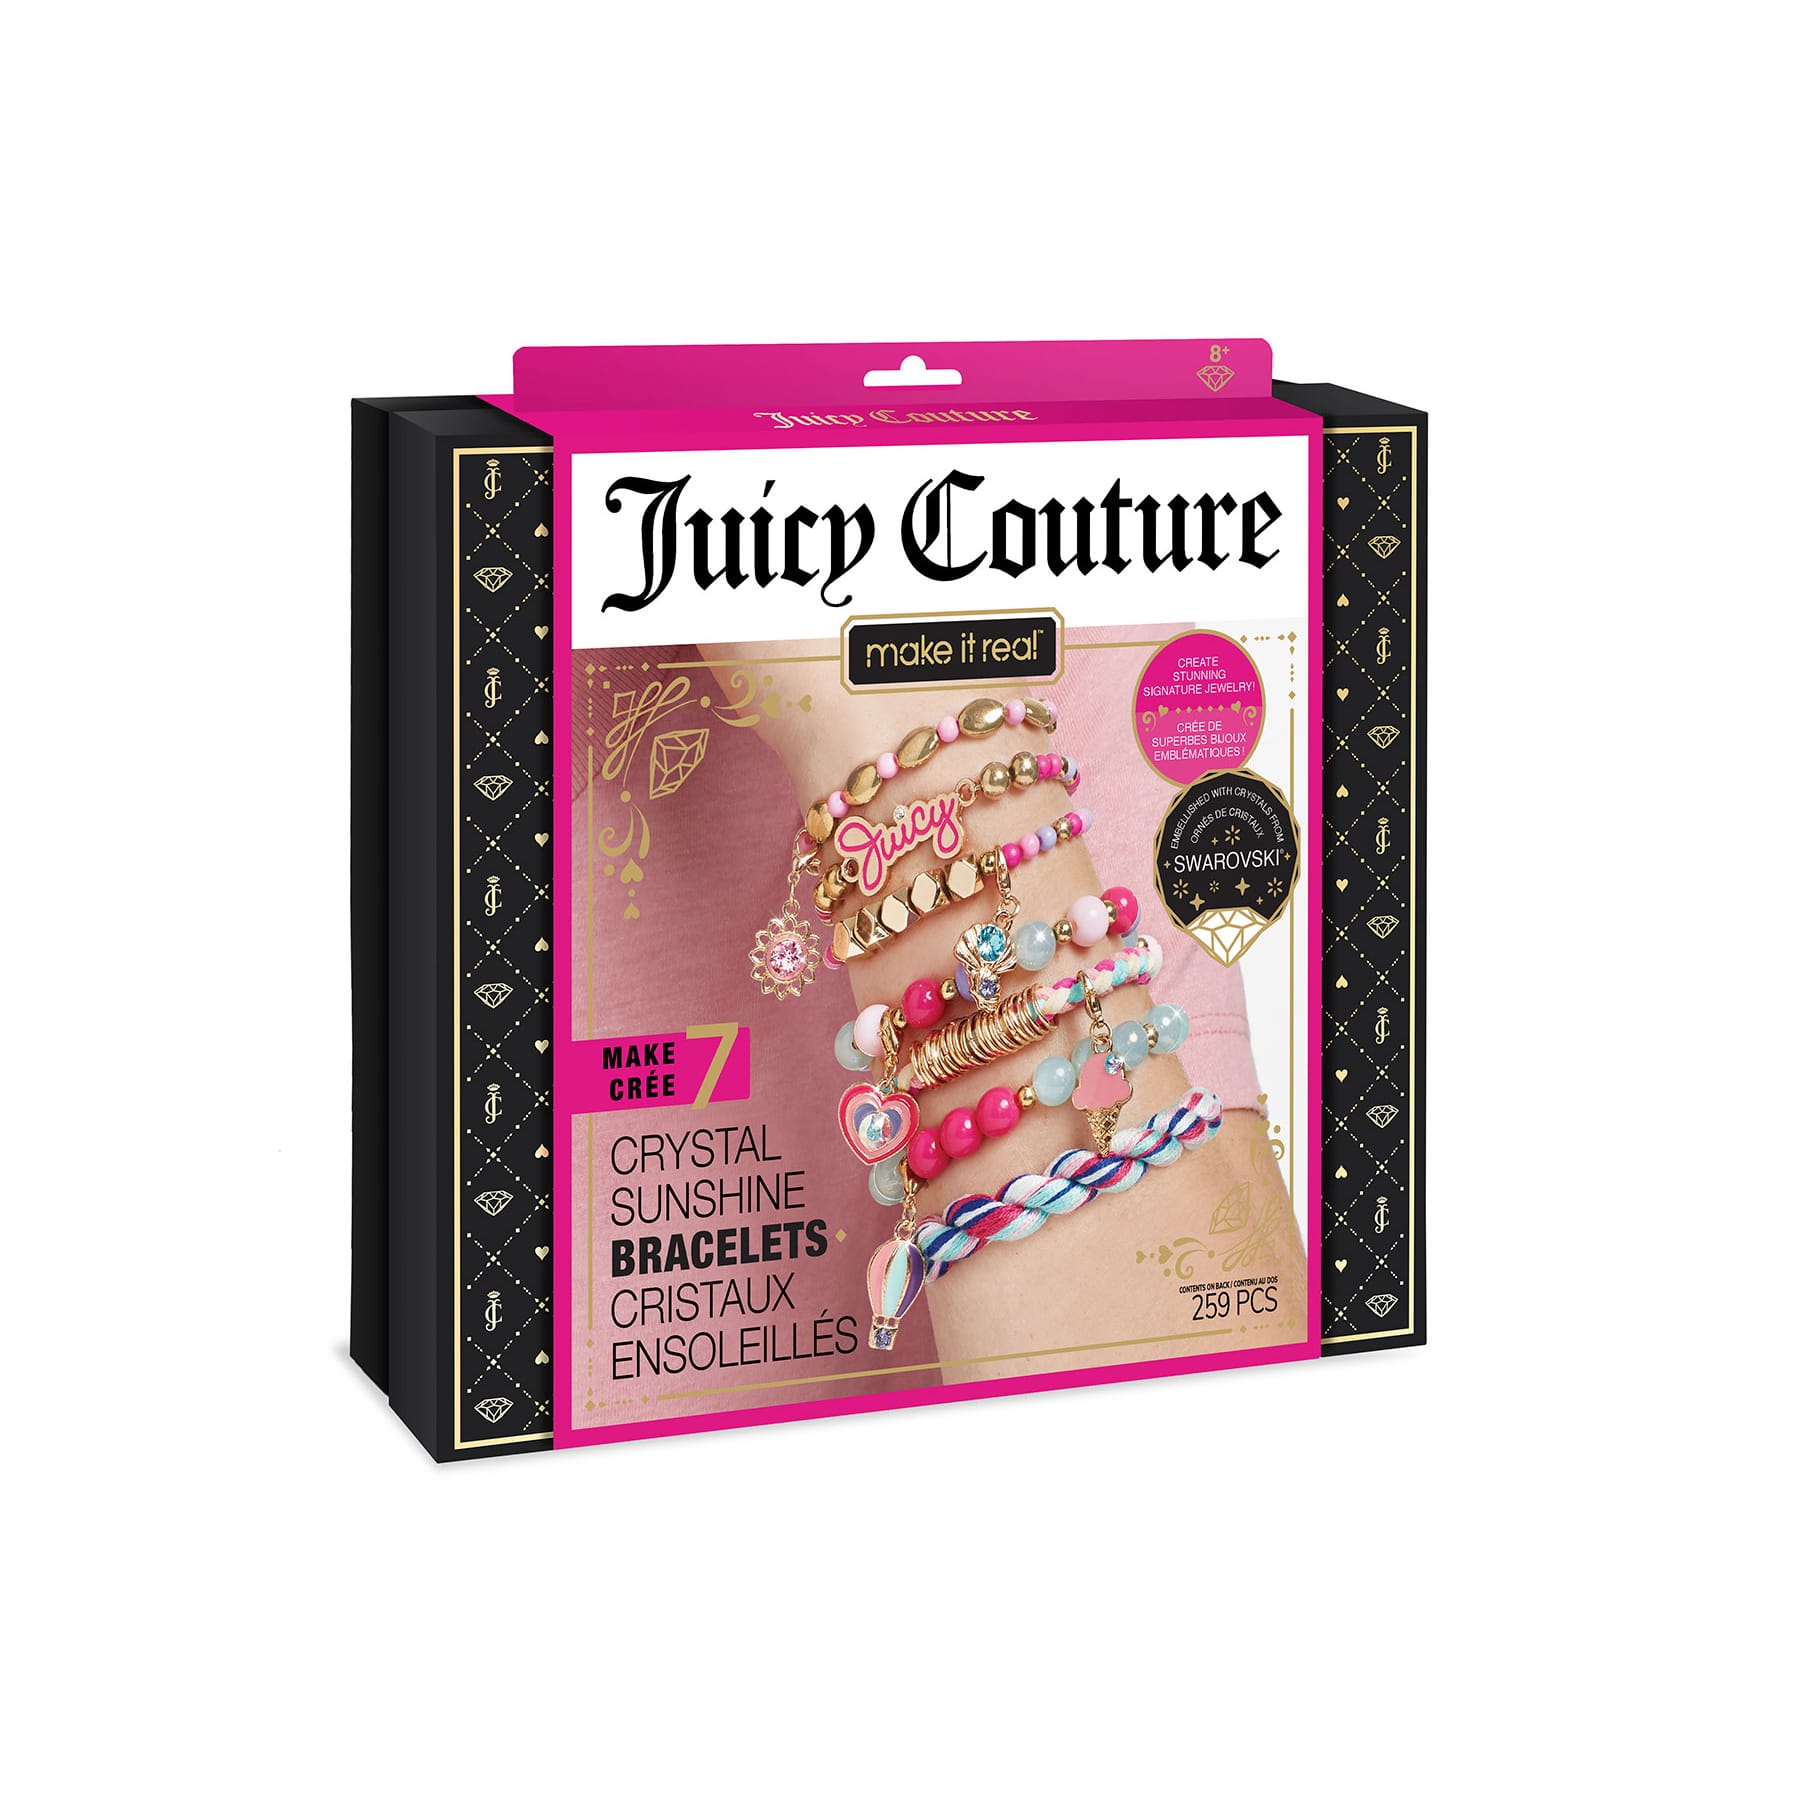 DIY Juicy Couture Chains & Charms 